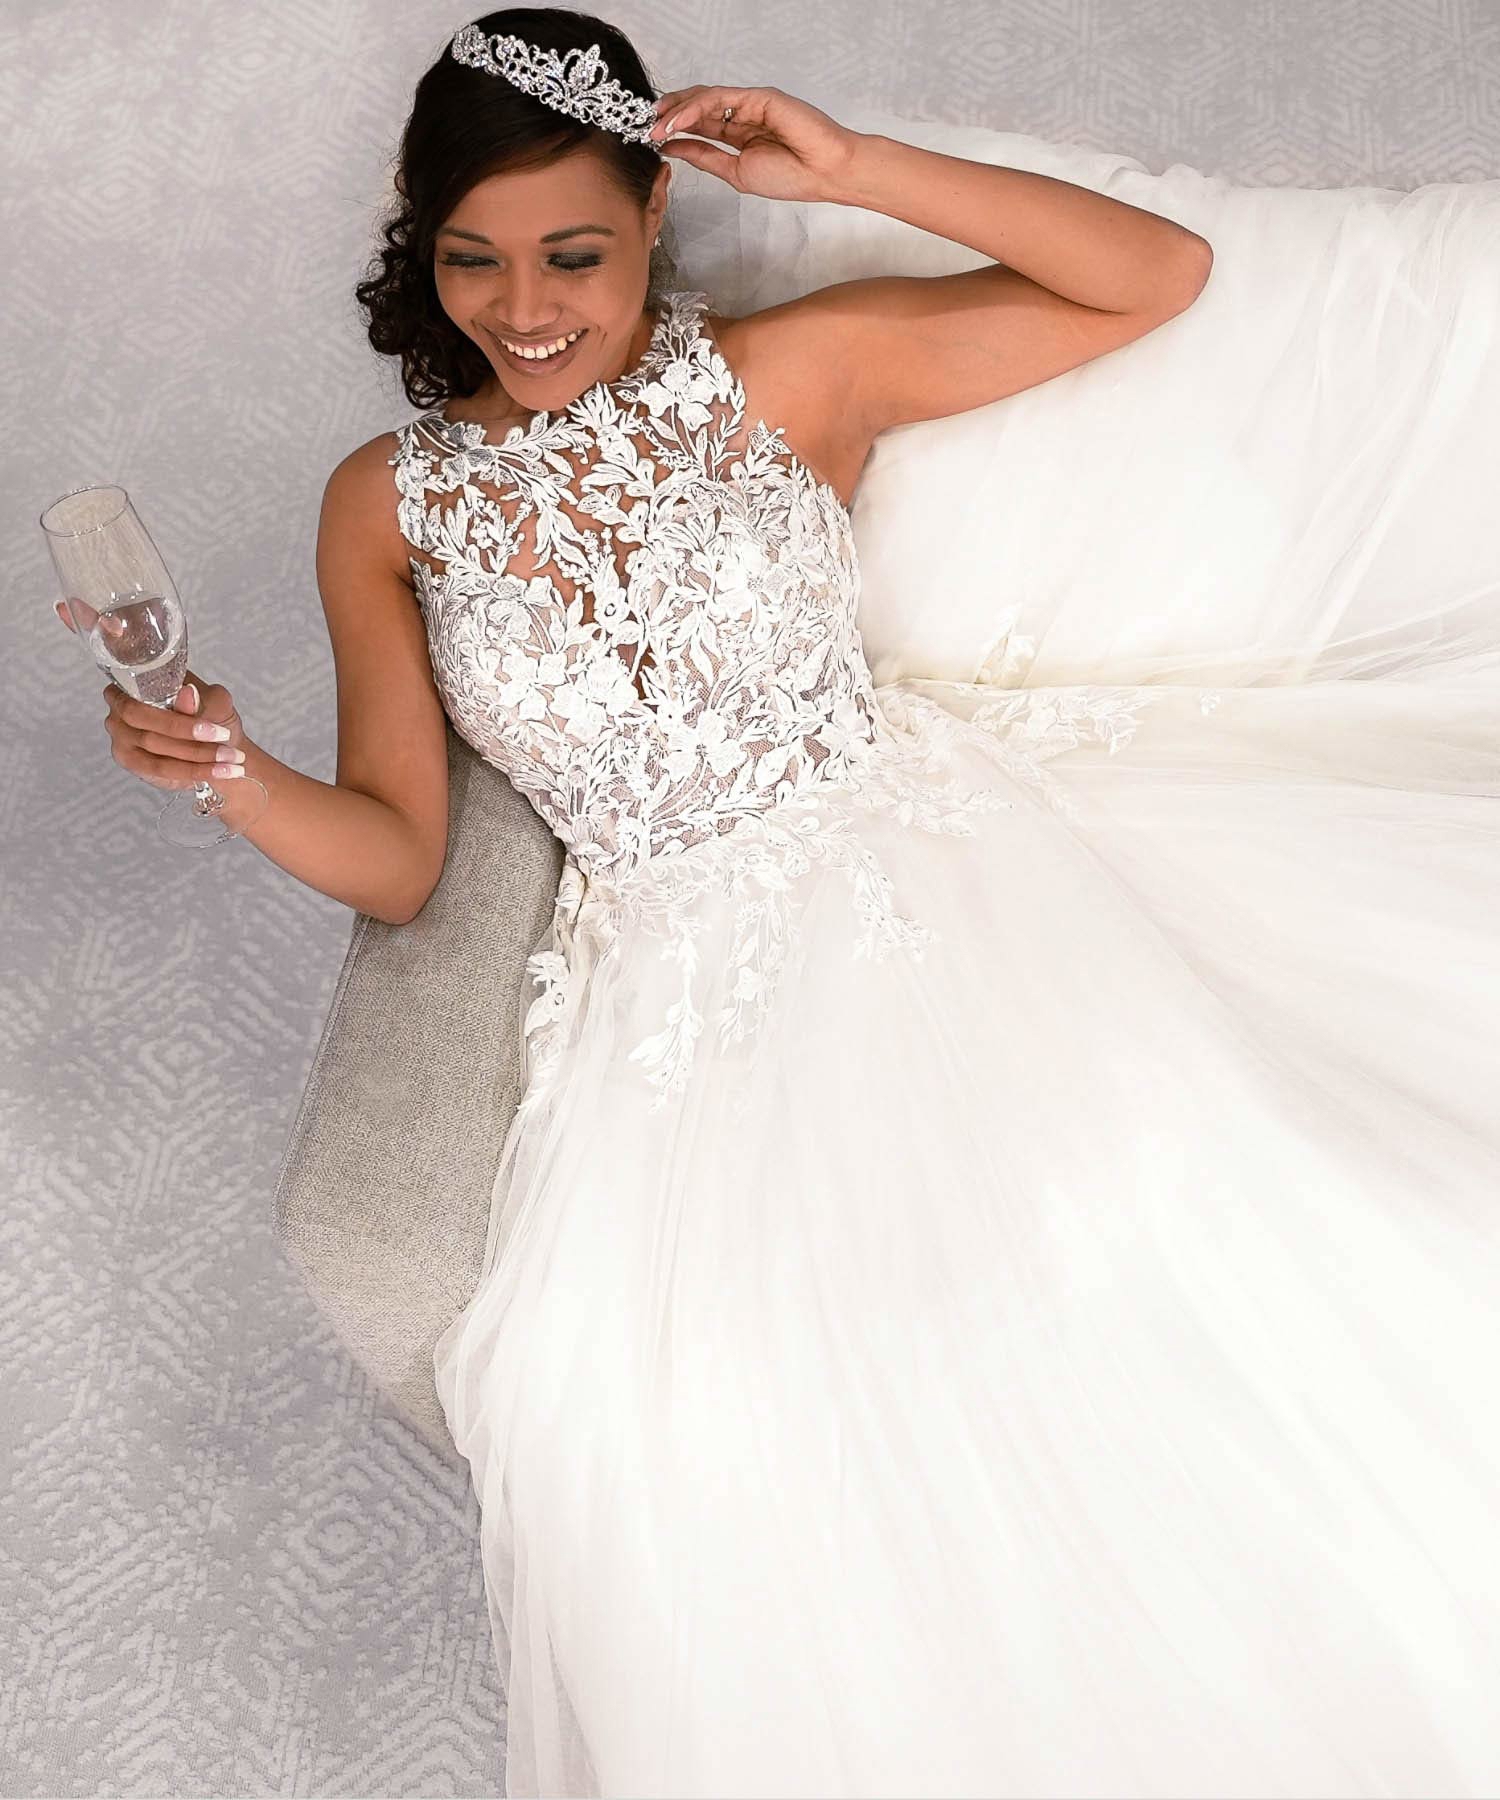 Model wearing a white bridal gown sitting on the sofa - Mobile Desktop